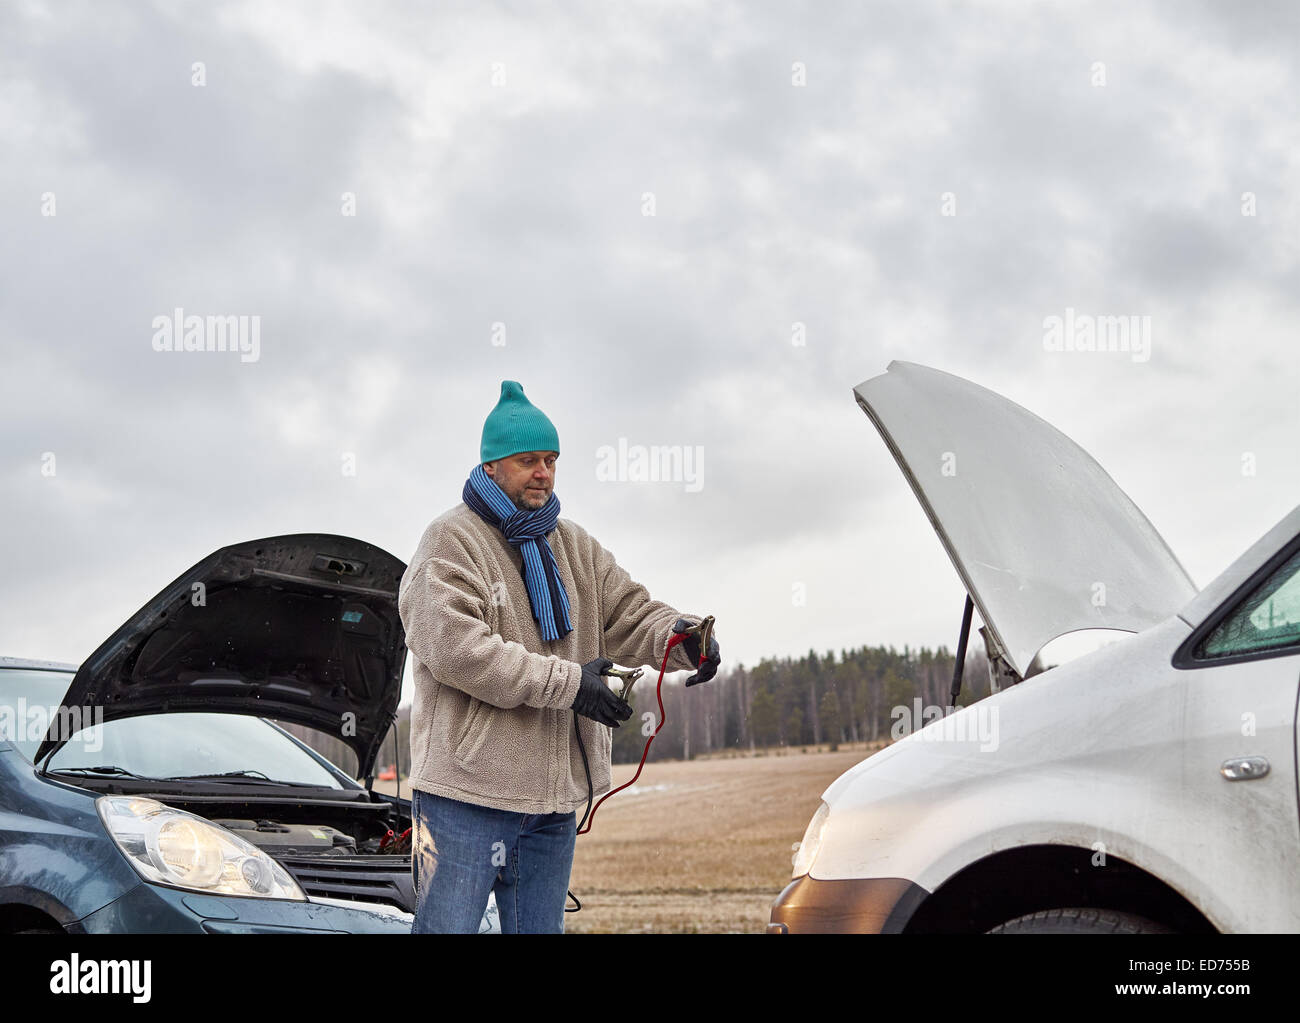 Mid adult man use a jumper cables between the two vehicles Stock Photo